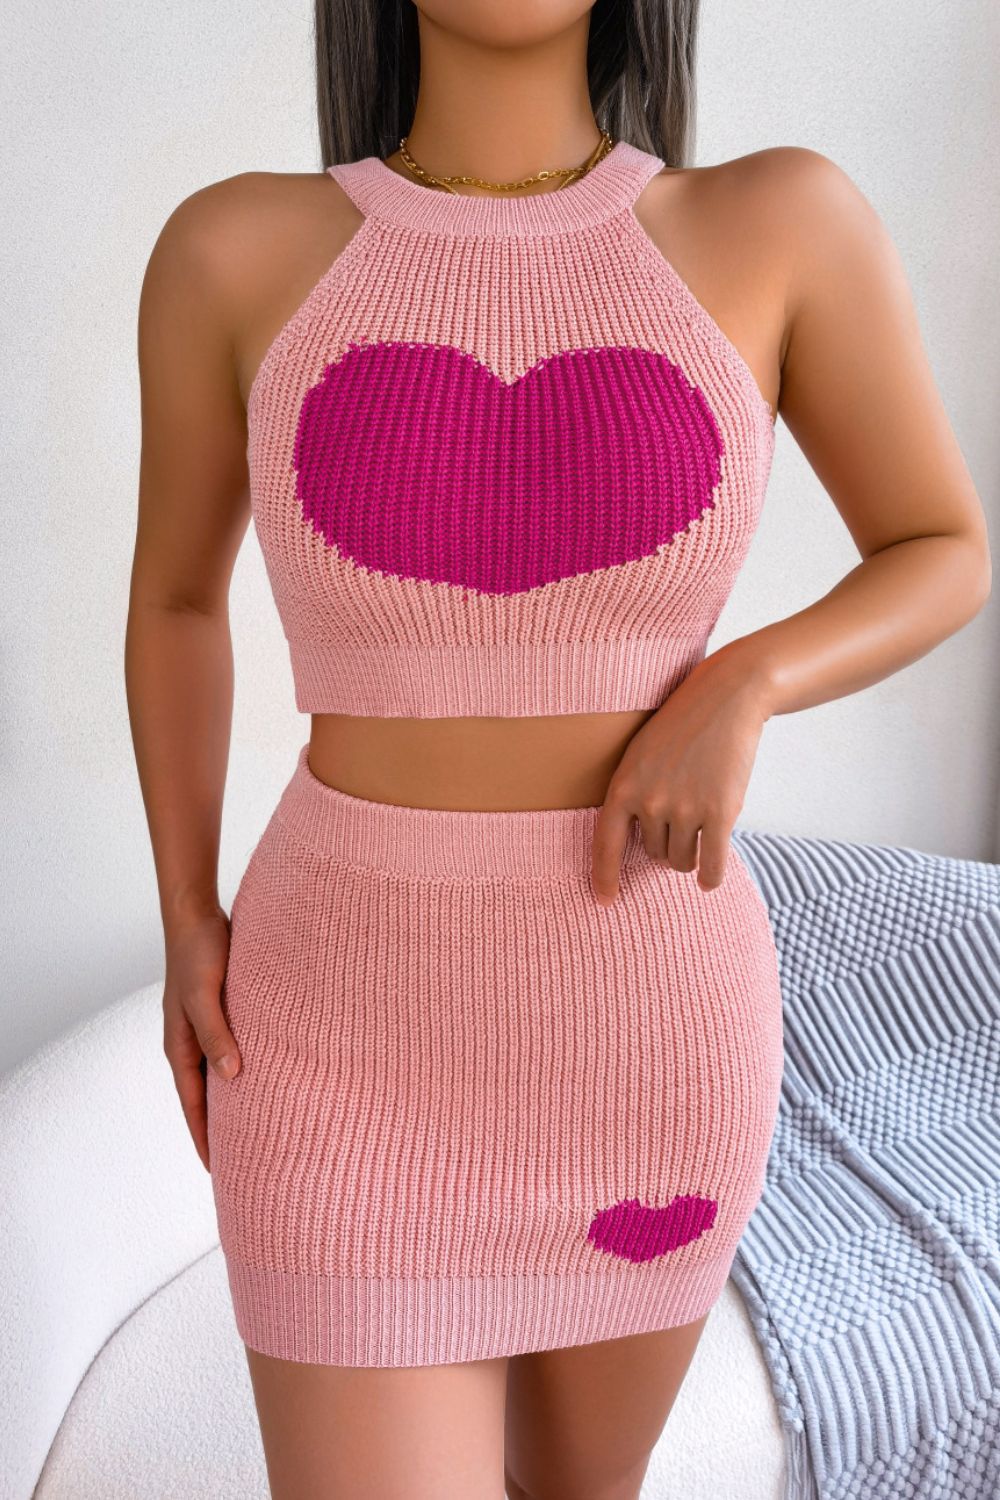 Heart Contrast Ribbed Sleeveless Knit Top and Skirt Set | Sugarz Chique Boutique